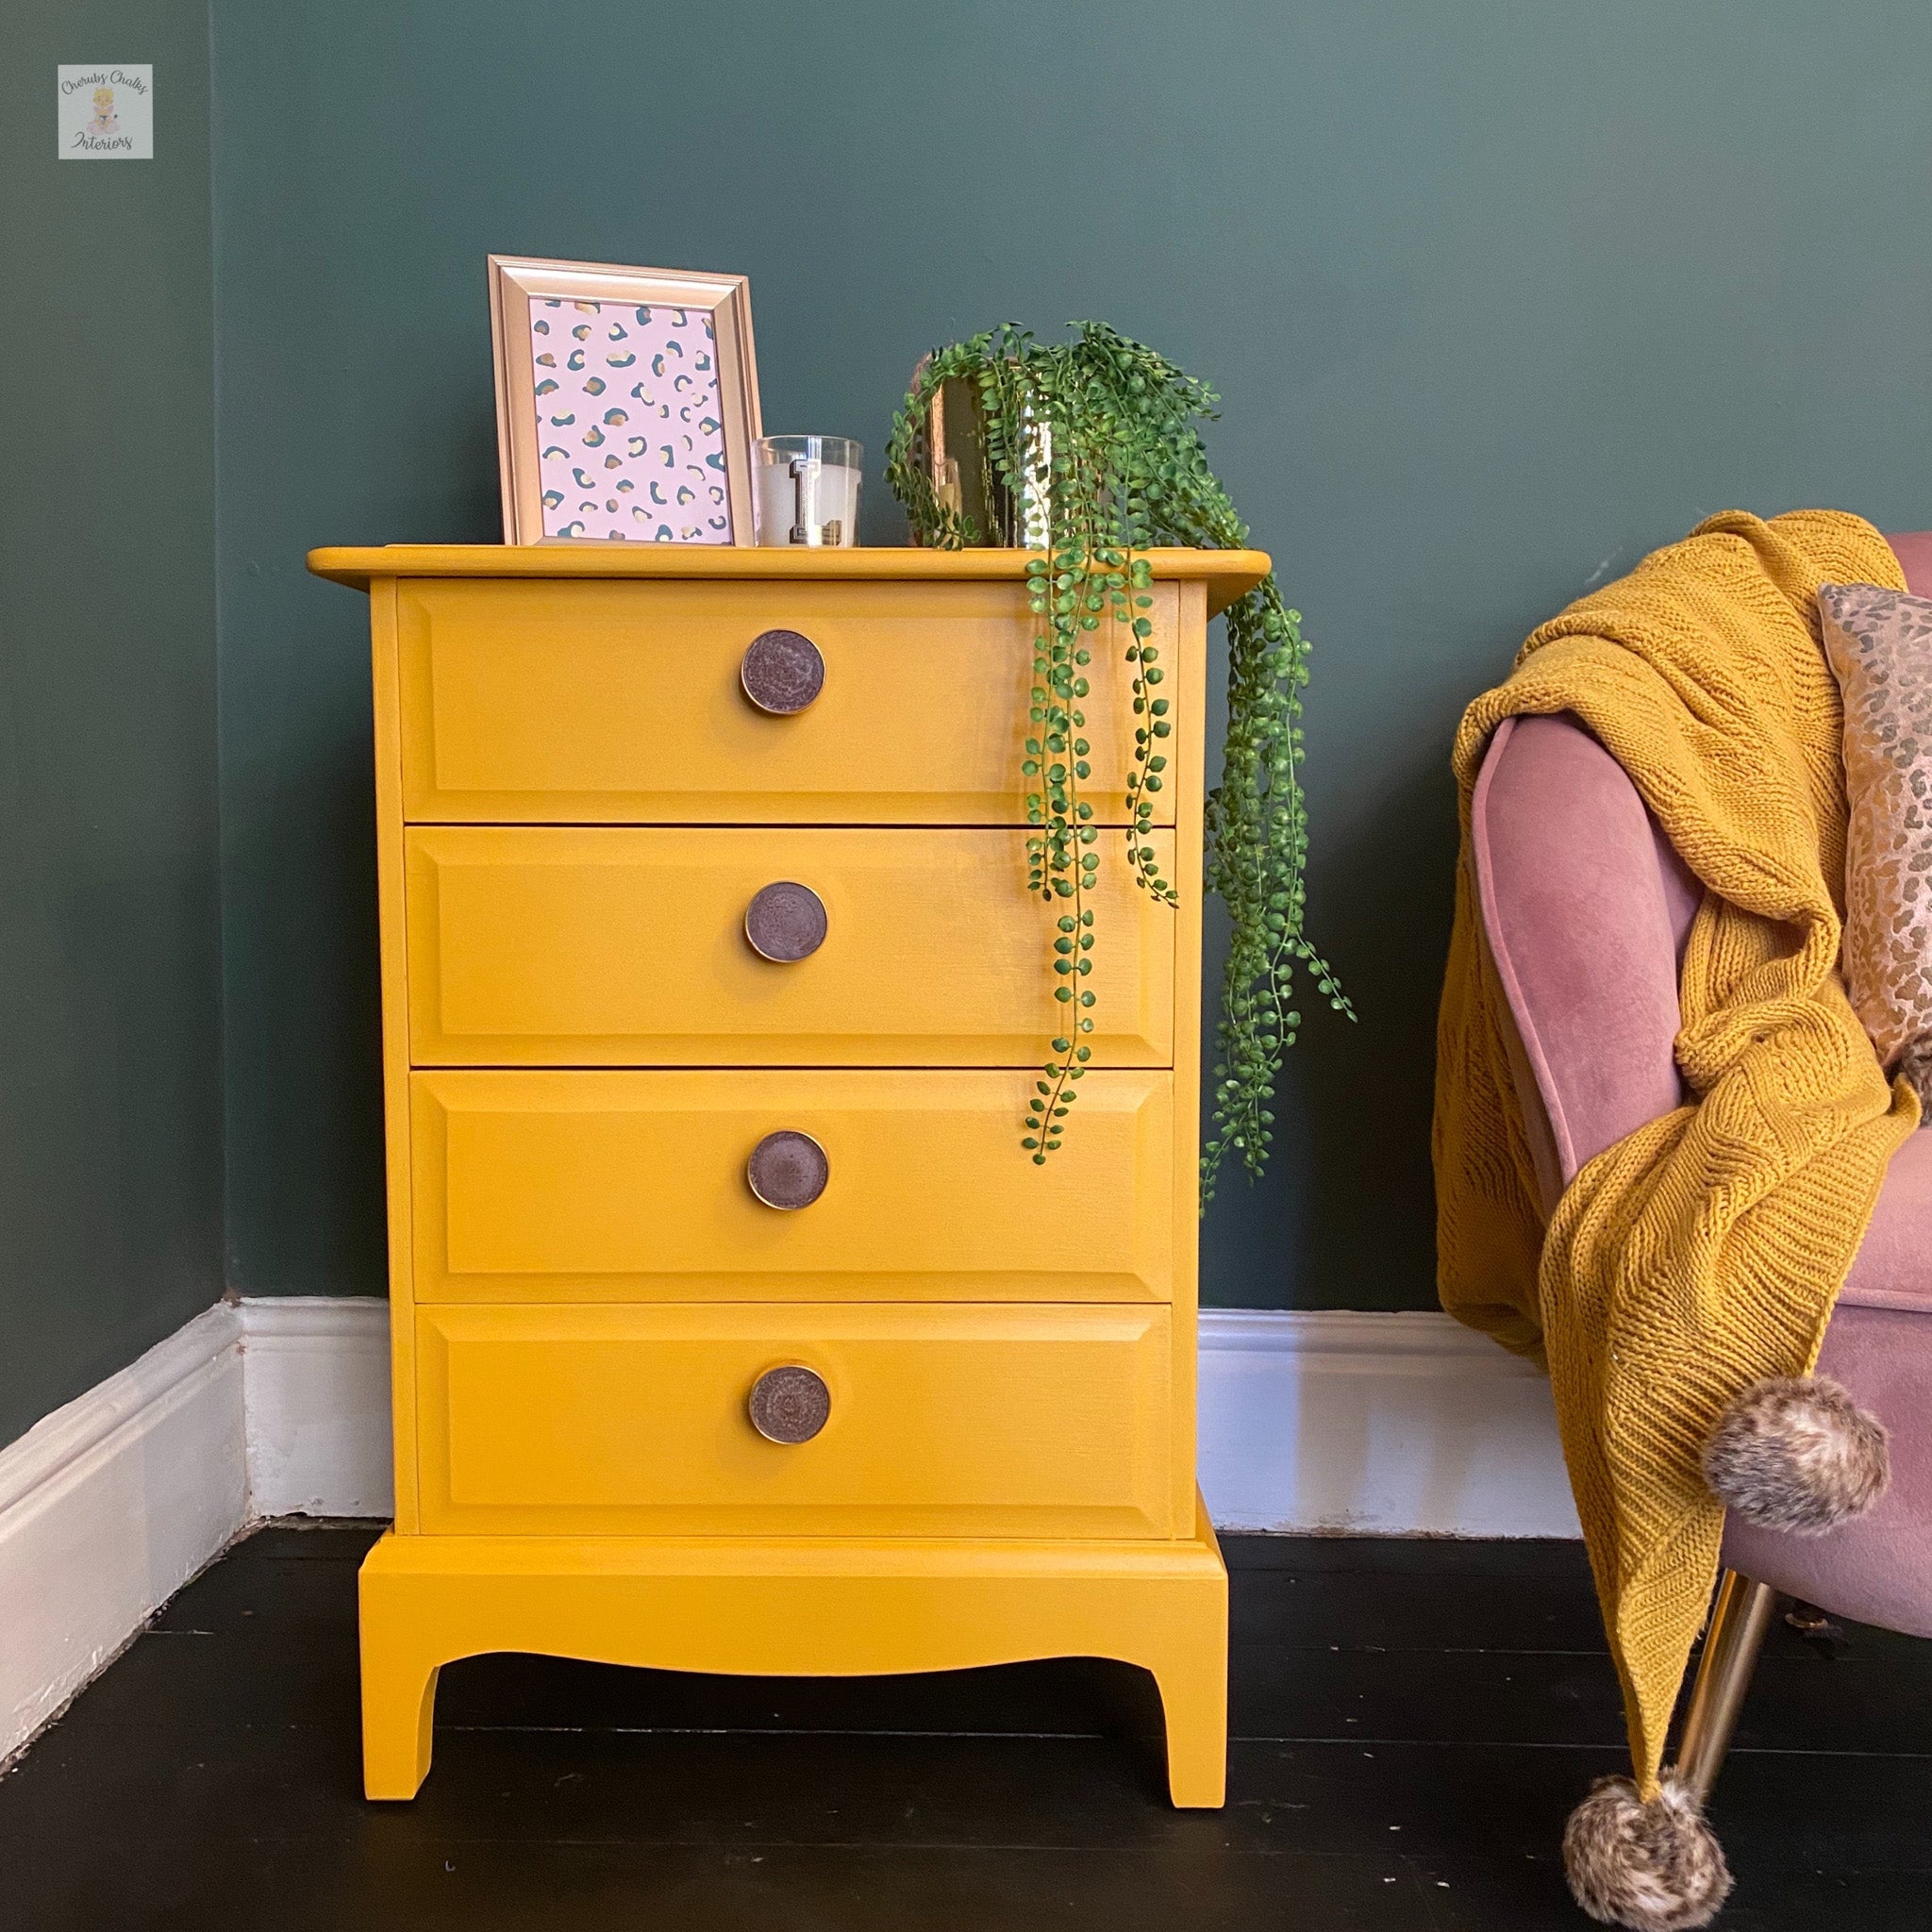 A vintage 4-drawer nightstand refurbished by Cherubs Chalks Interiors is painted in Dixie Belle's Colonel Mustard chalk mineral paint.